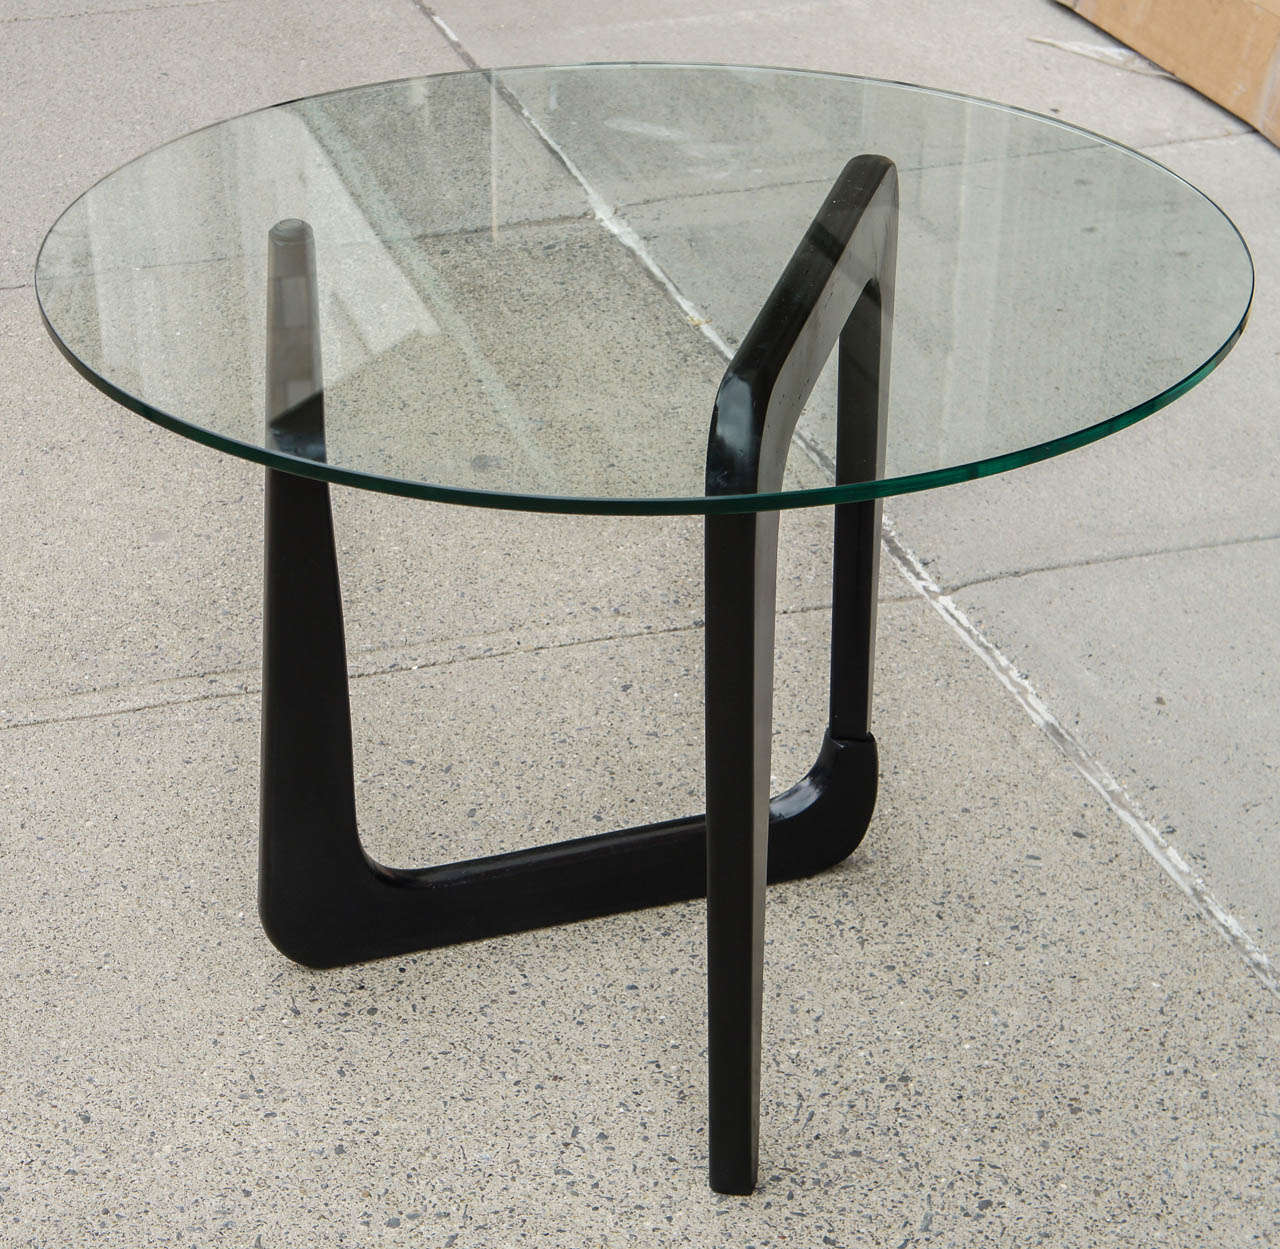 This end table design,most often seen as a coffee table, is after a design by Isamu Noguchi. Almost immediately considered a classical design of the time this table is most likely  a period reinterpretation.The piece is old without a doubt and